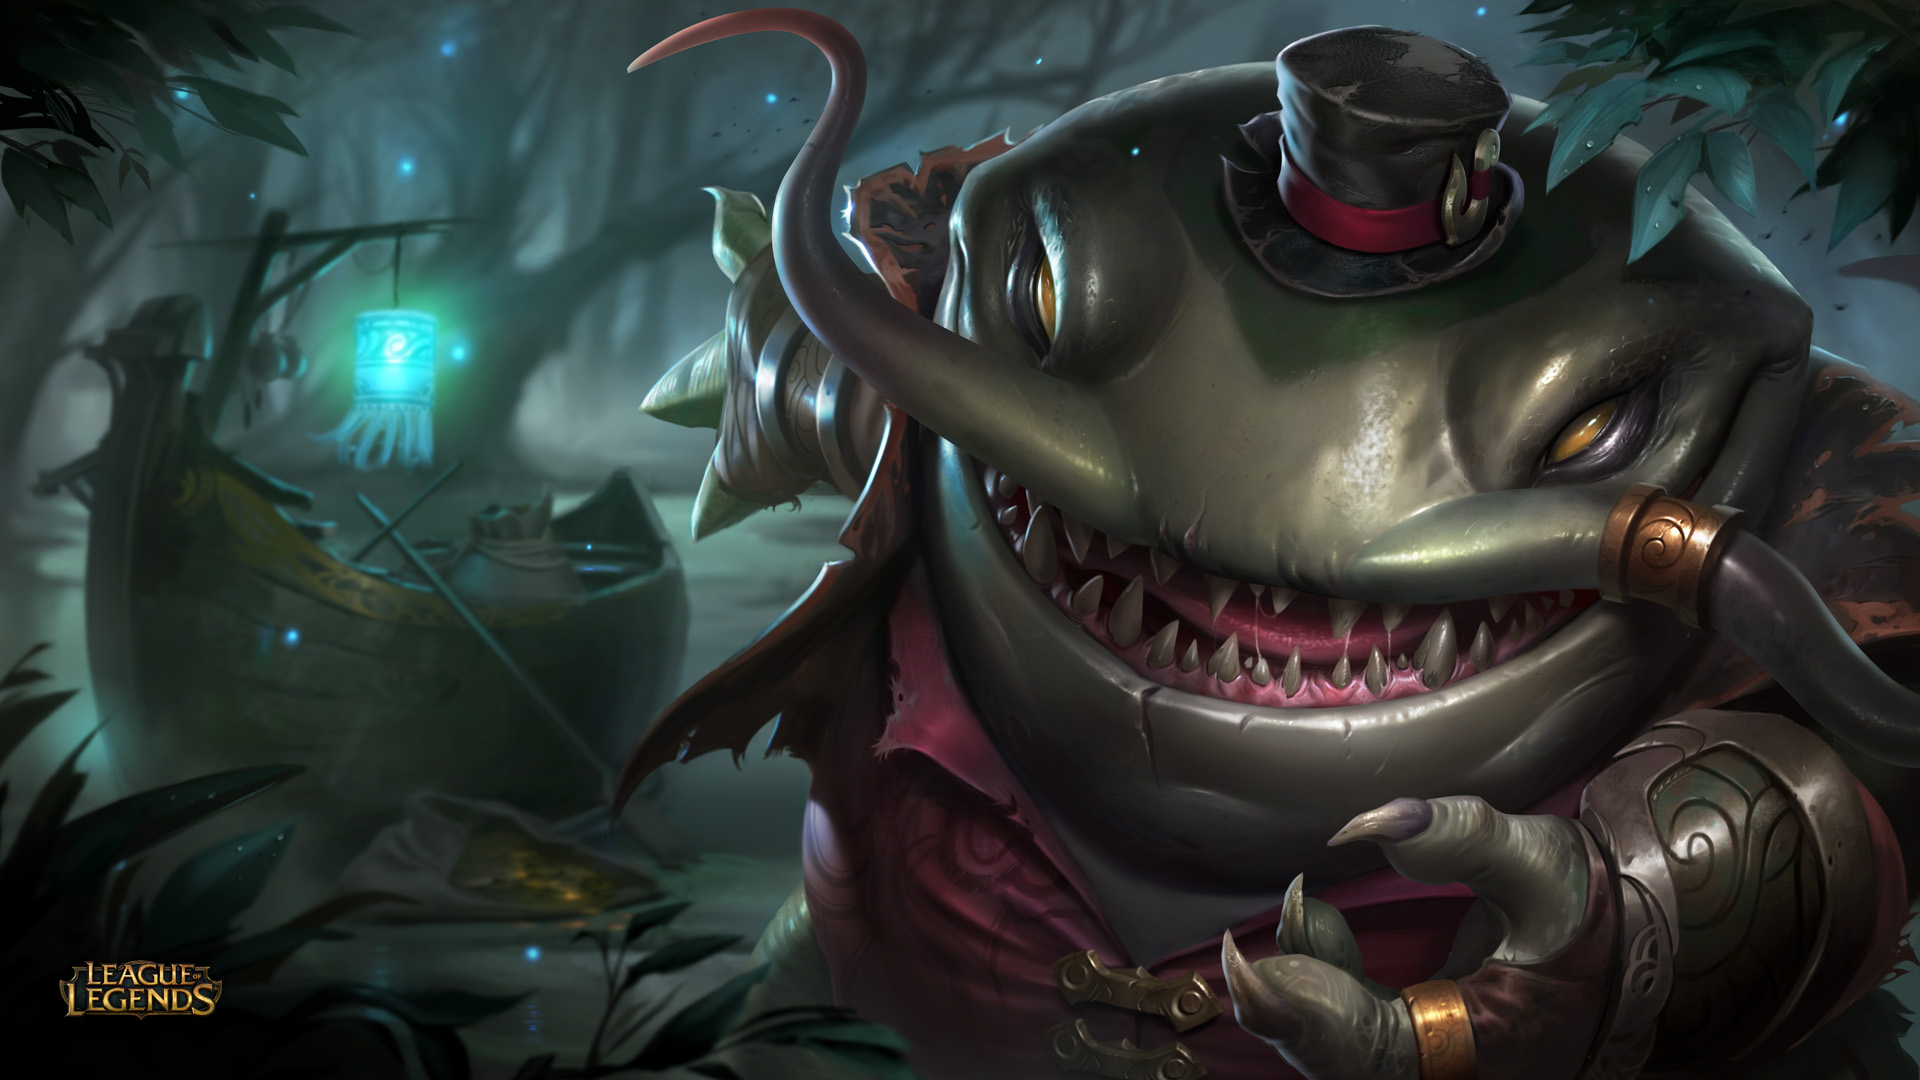 Tahm Kench - The River King by Chengwei Pan